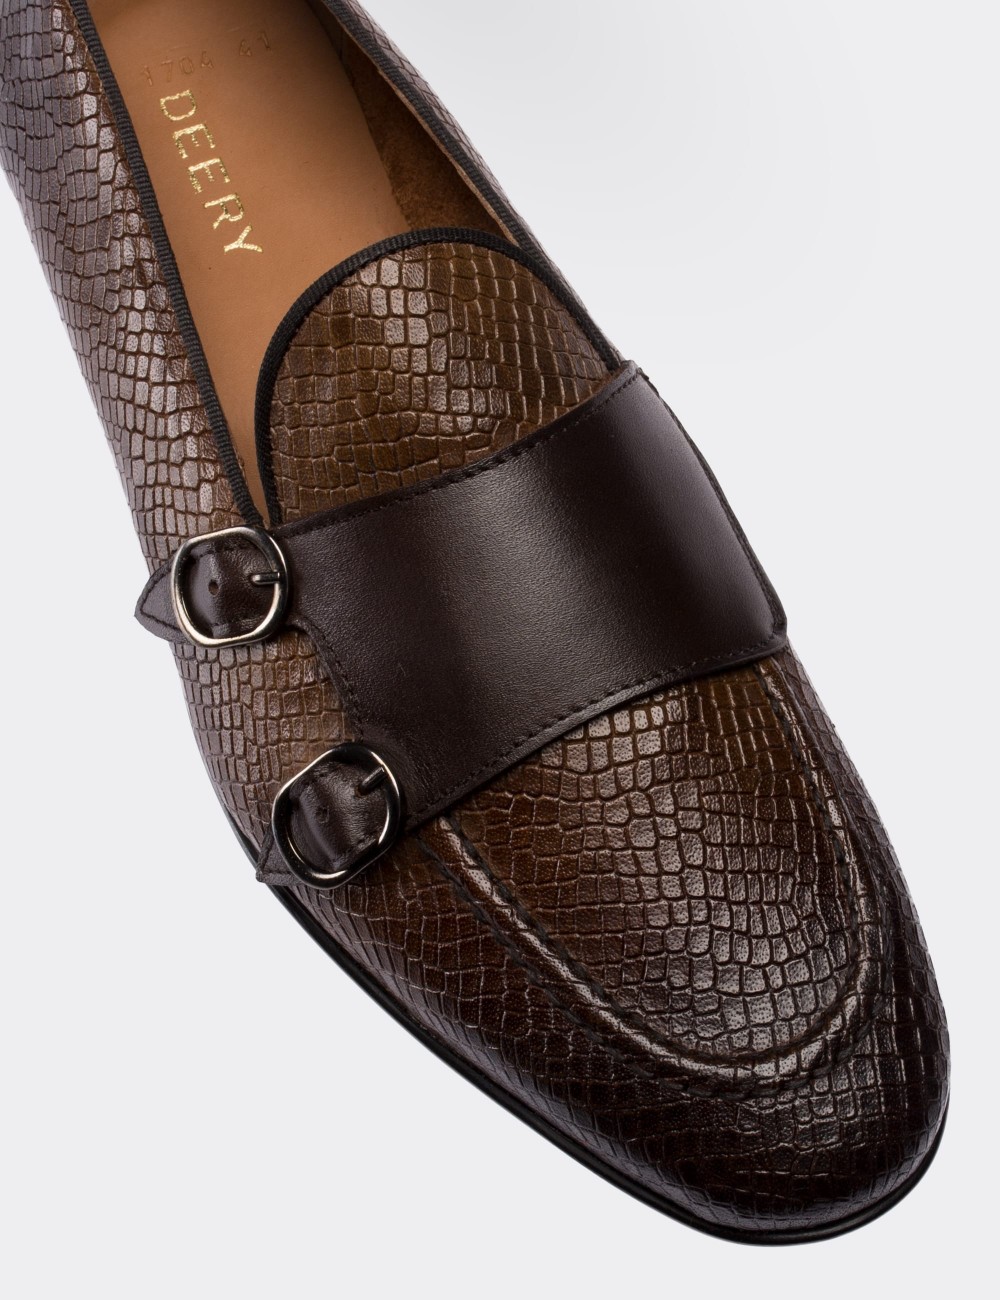 Brown  Leather Croco Loafers - 01704MKHVC01